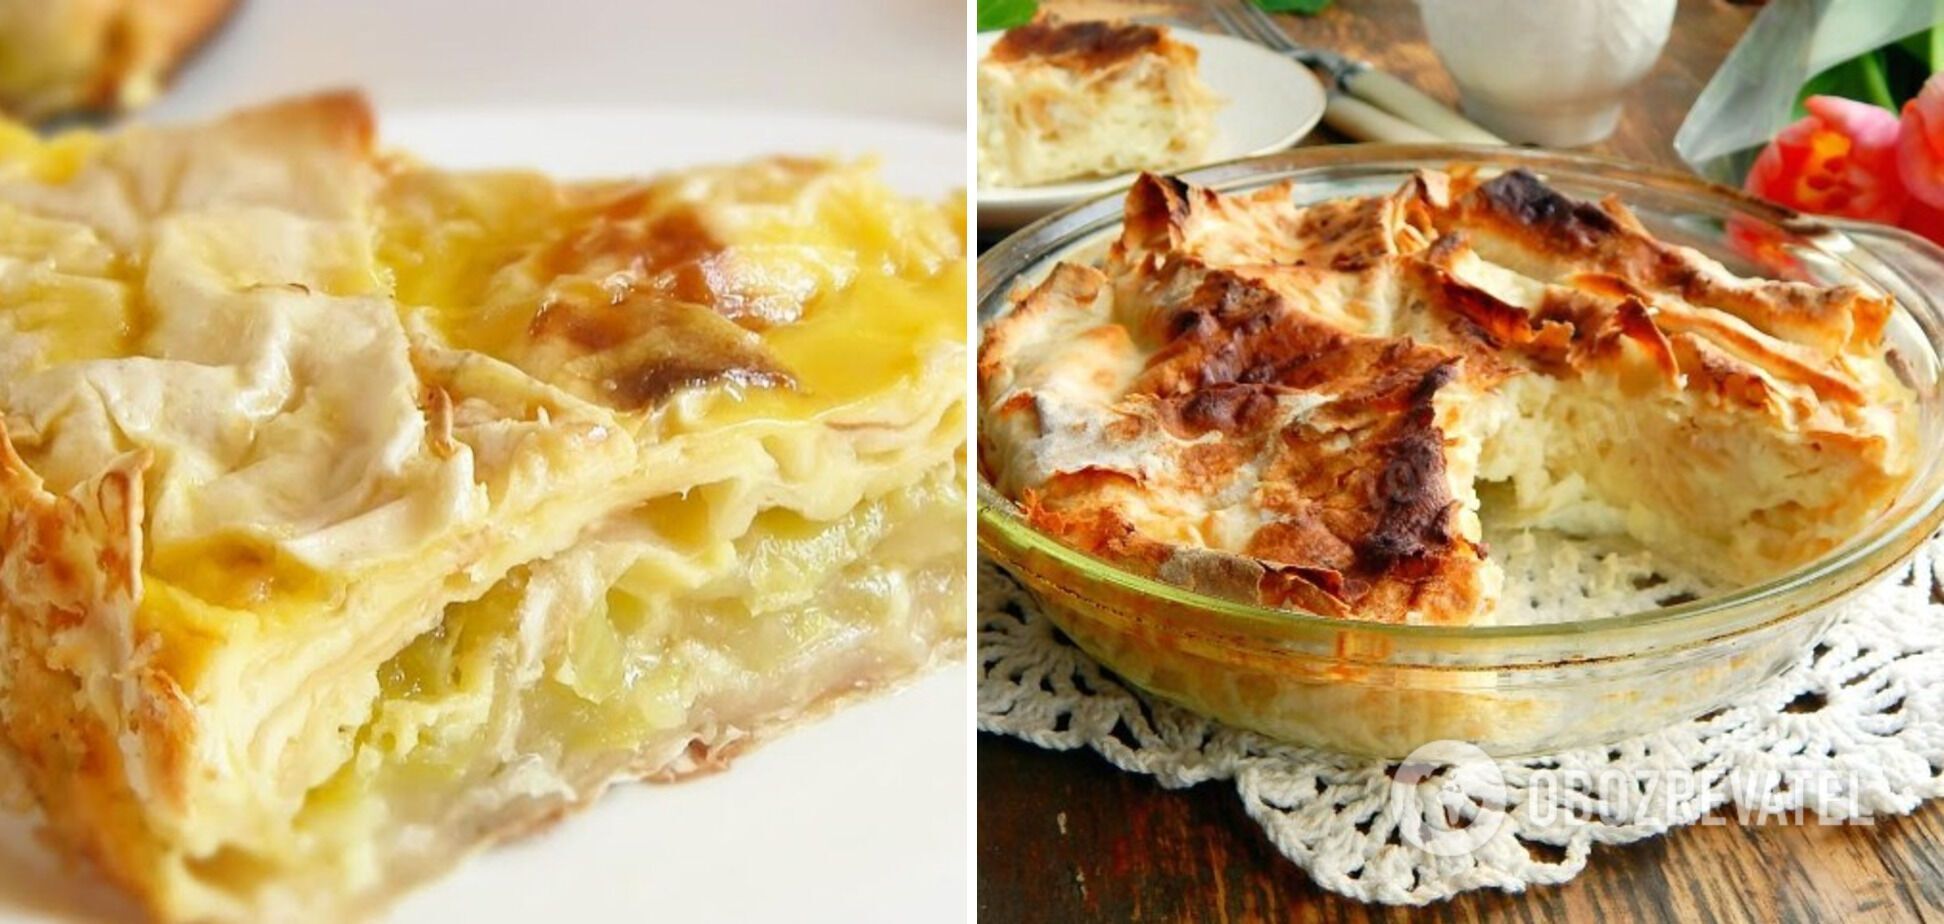 Pita bread pie with cheese and apples